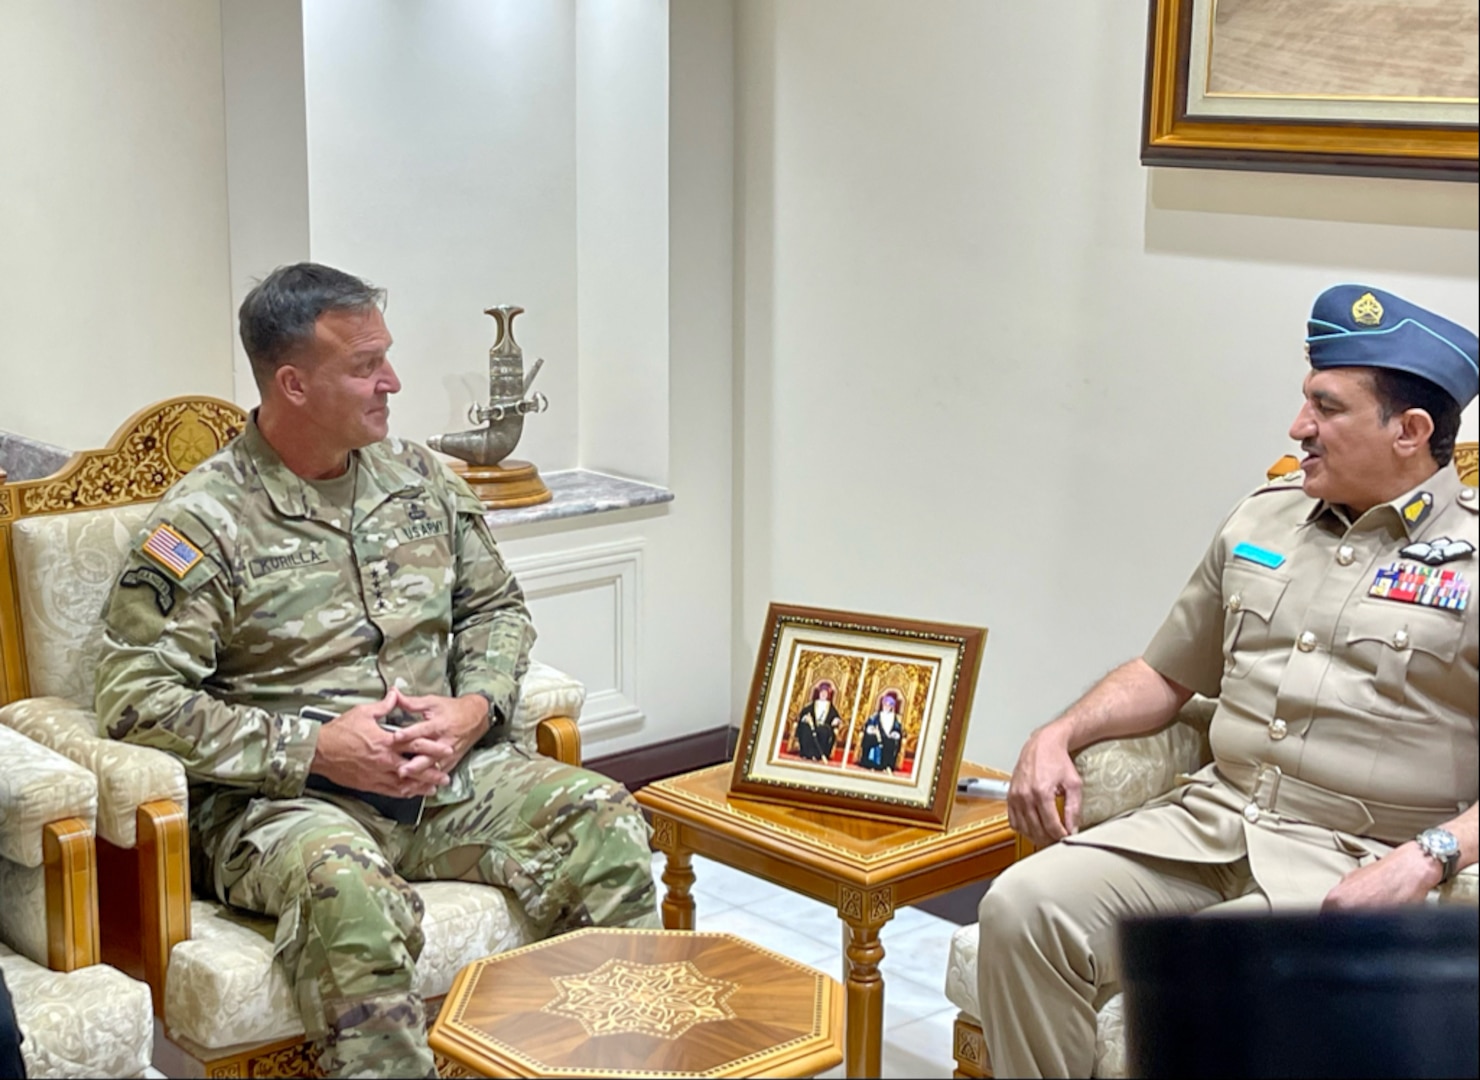 On Oct. 18, at the Al Murtafa'a Garrison in Muscat, Gen. Michael “Erik” Kurilla, commander of U.S. Central Command, met Air Vice Marshal Khamis Hammad Al Ghafri, commander of the Royal Air Force of Oman and Dr. Mohammed al Zaabi, Secretary General of the Oman Ministry of Defense. The engagement was Kurilla’s second visit here in the past five months.

The leaders spoke about matters of importance to both militaries, including opportunities to strengthen security cooperation through training and partnered exercises.